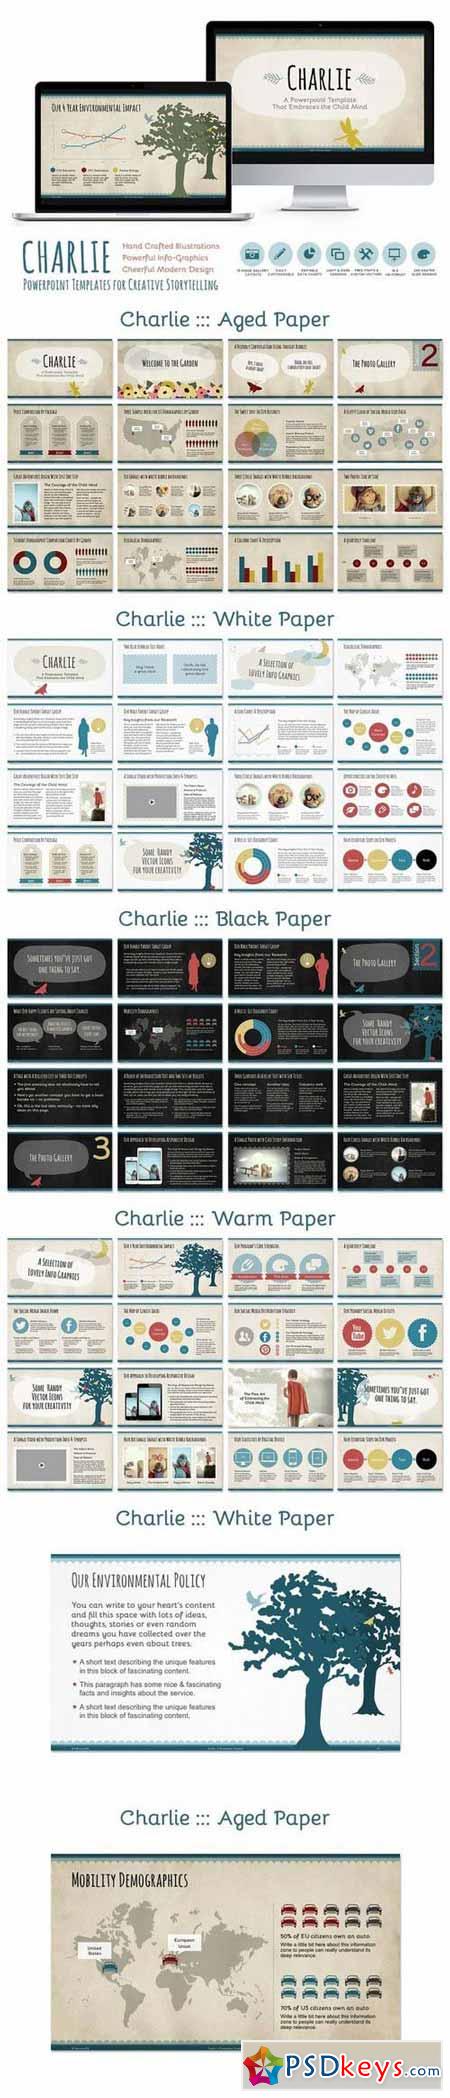 Charlie Powerpoint Template 589745